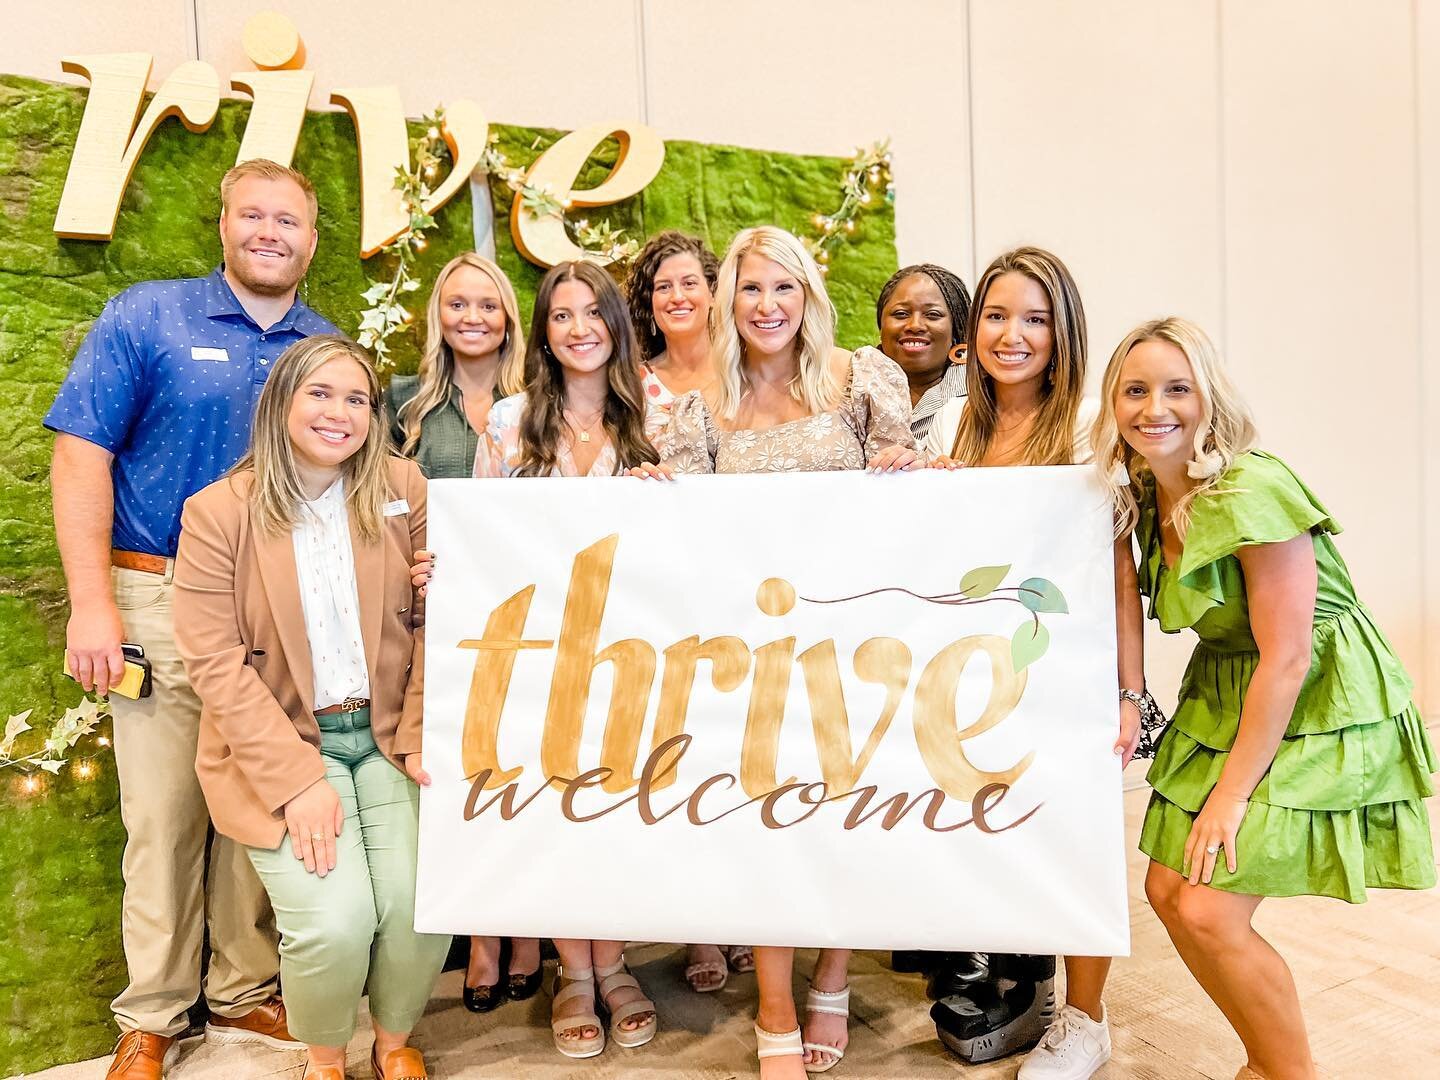 Yesterday I had the privilege to serve as an Ambassador for this year&rsquo;s Pivot Emerging Leaders Conference at FSU PC. It was such an amazing experience. This year&rsquo;s theme was &ldquo;Thrive.&rdquo; The emerging leaders in our community took